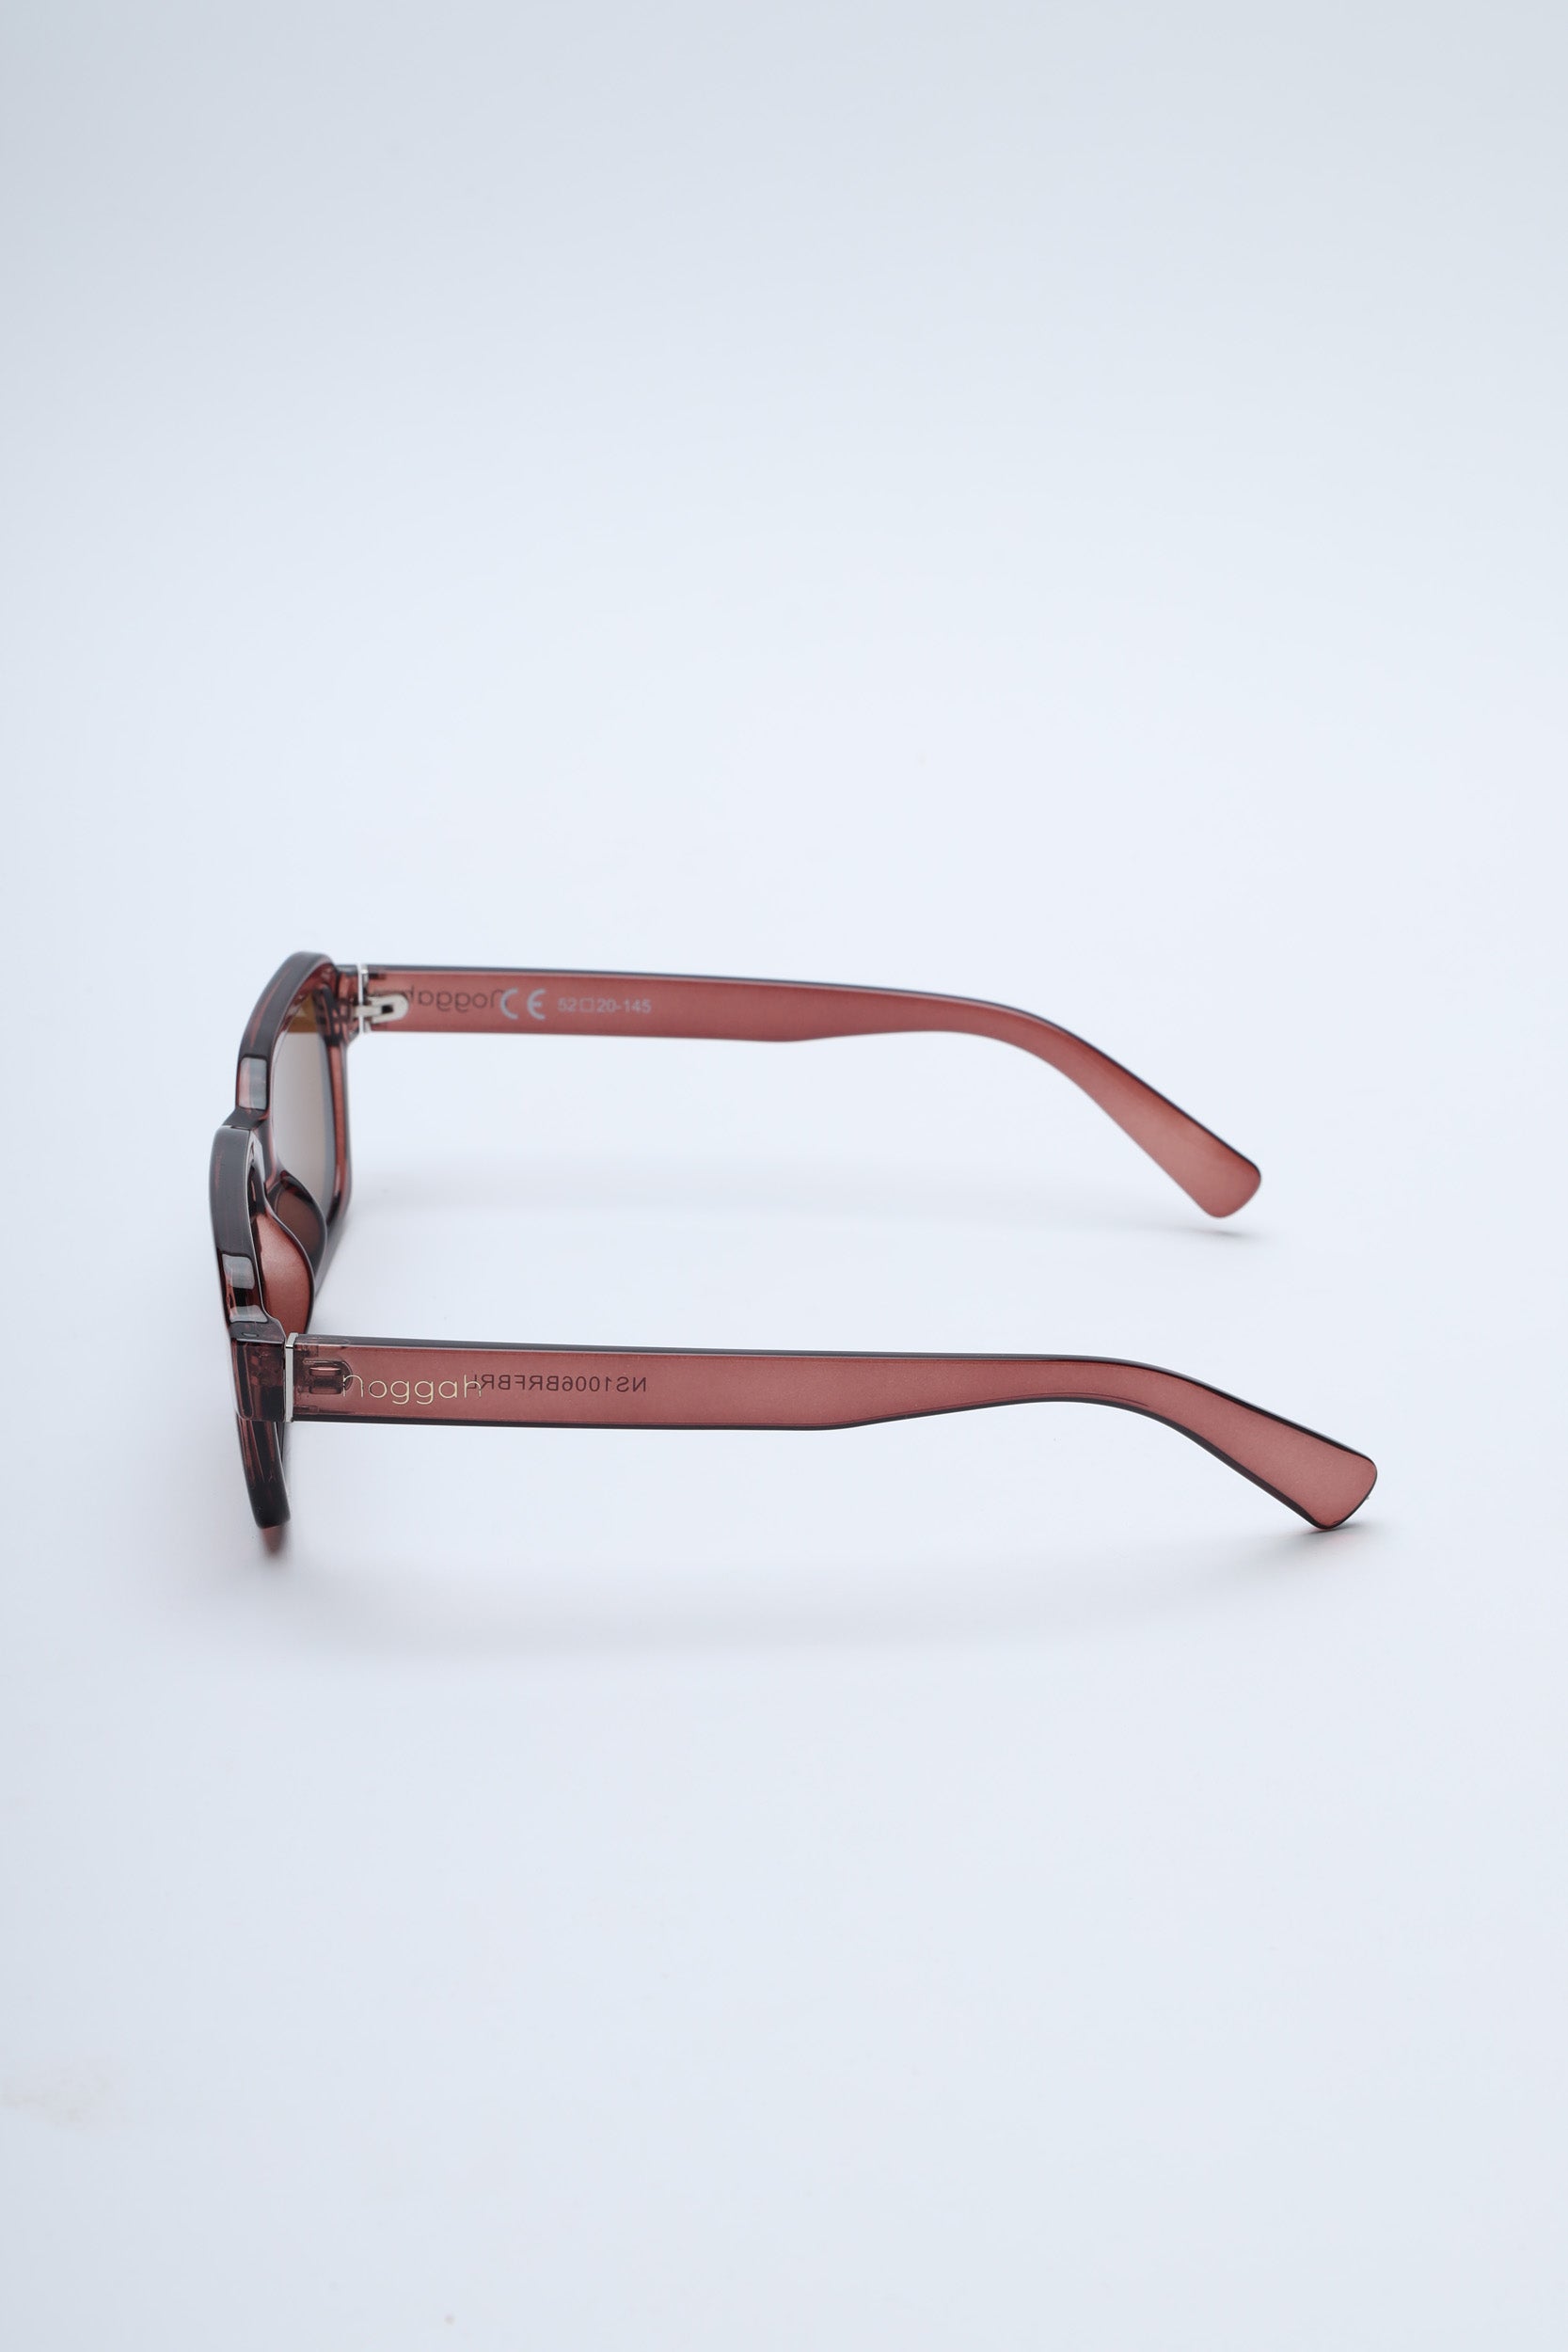 NS1006BRFBRL PC Brown Frame with Brown Glass Lens Sunglasses